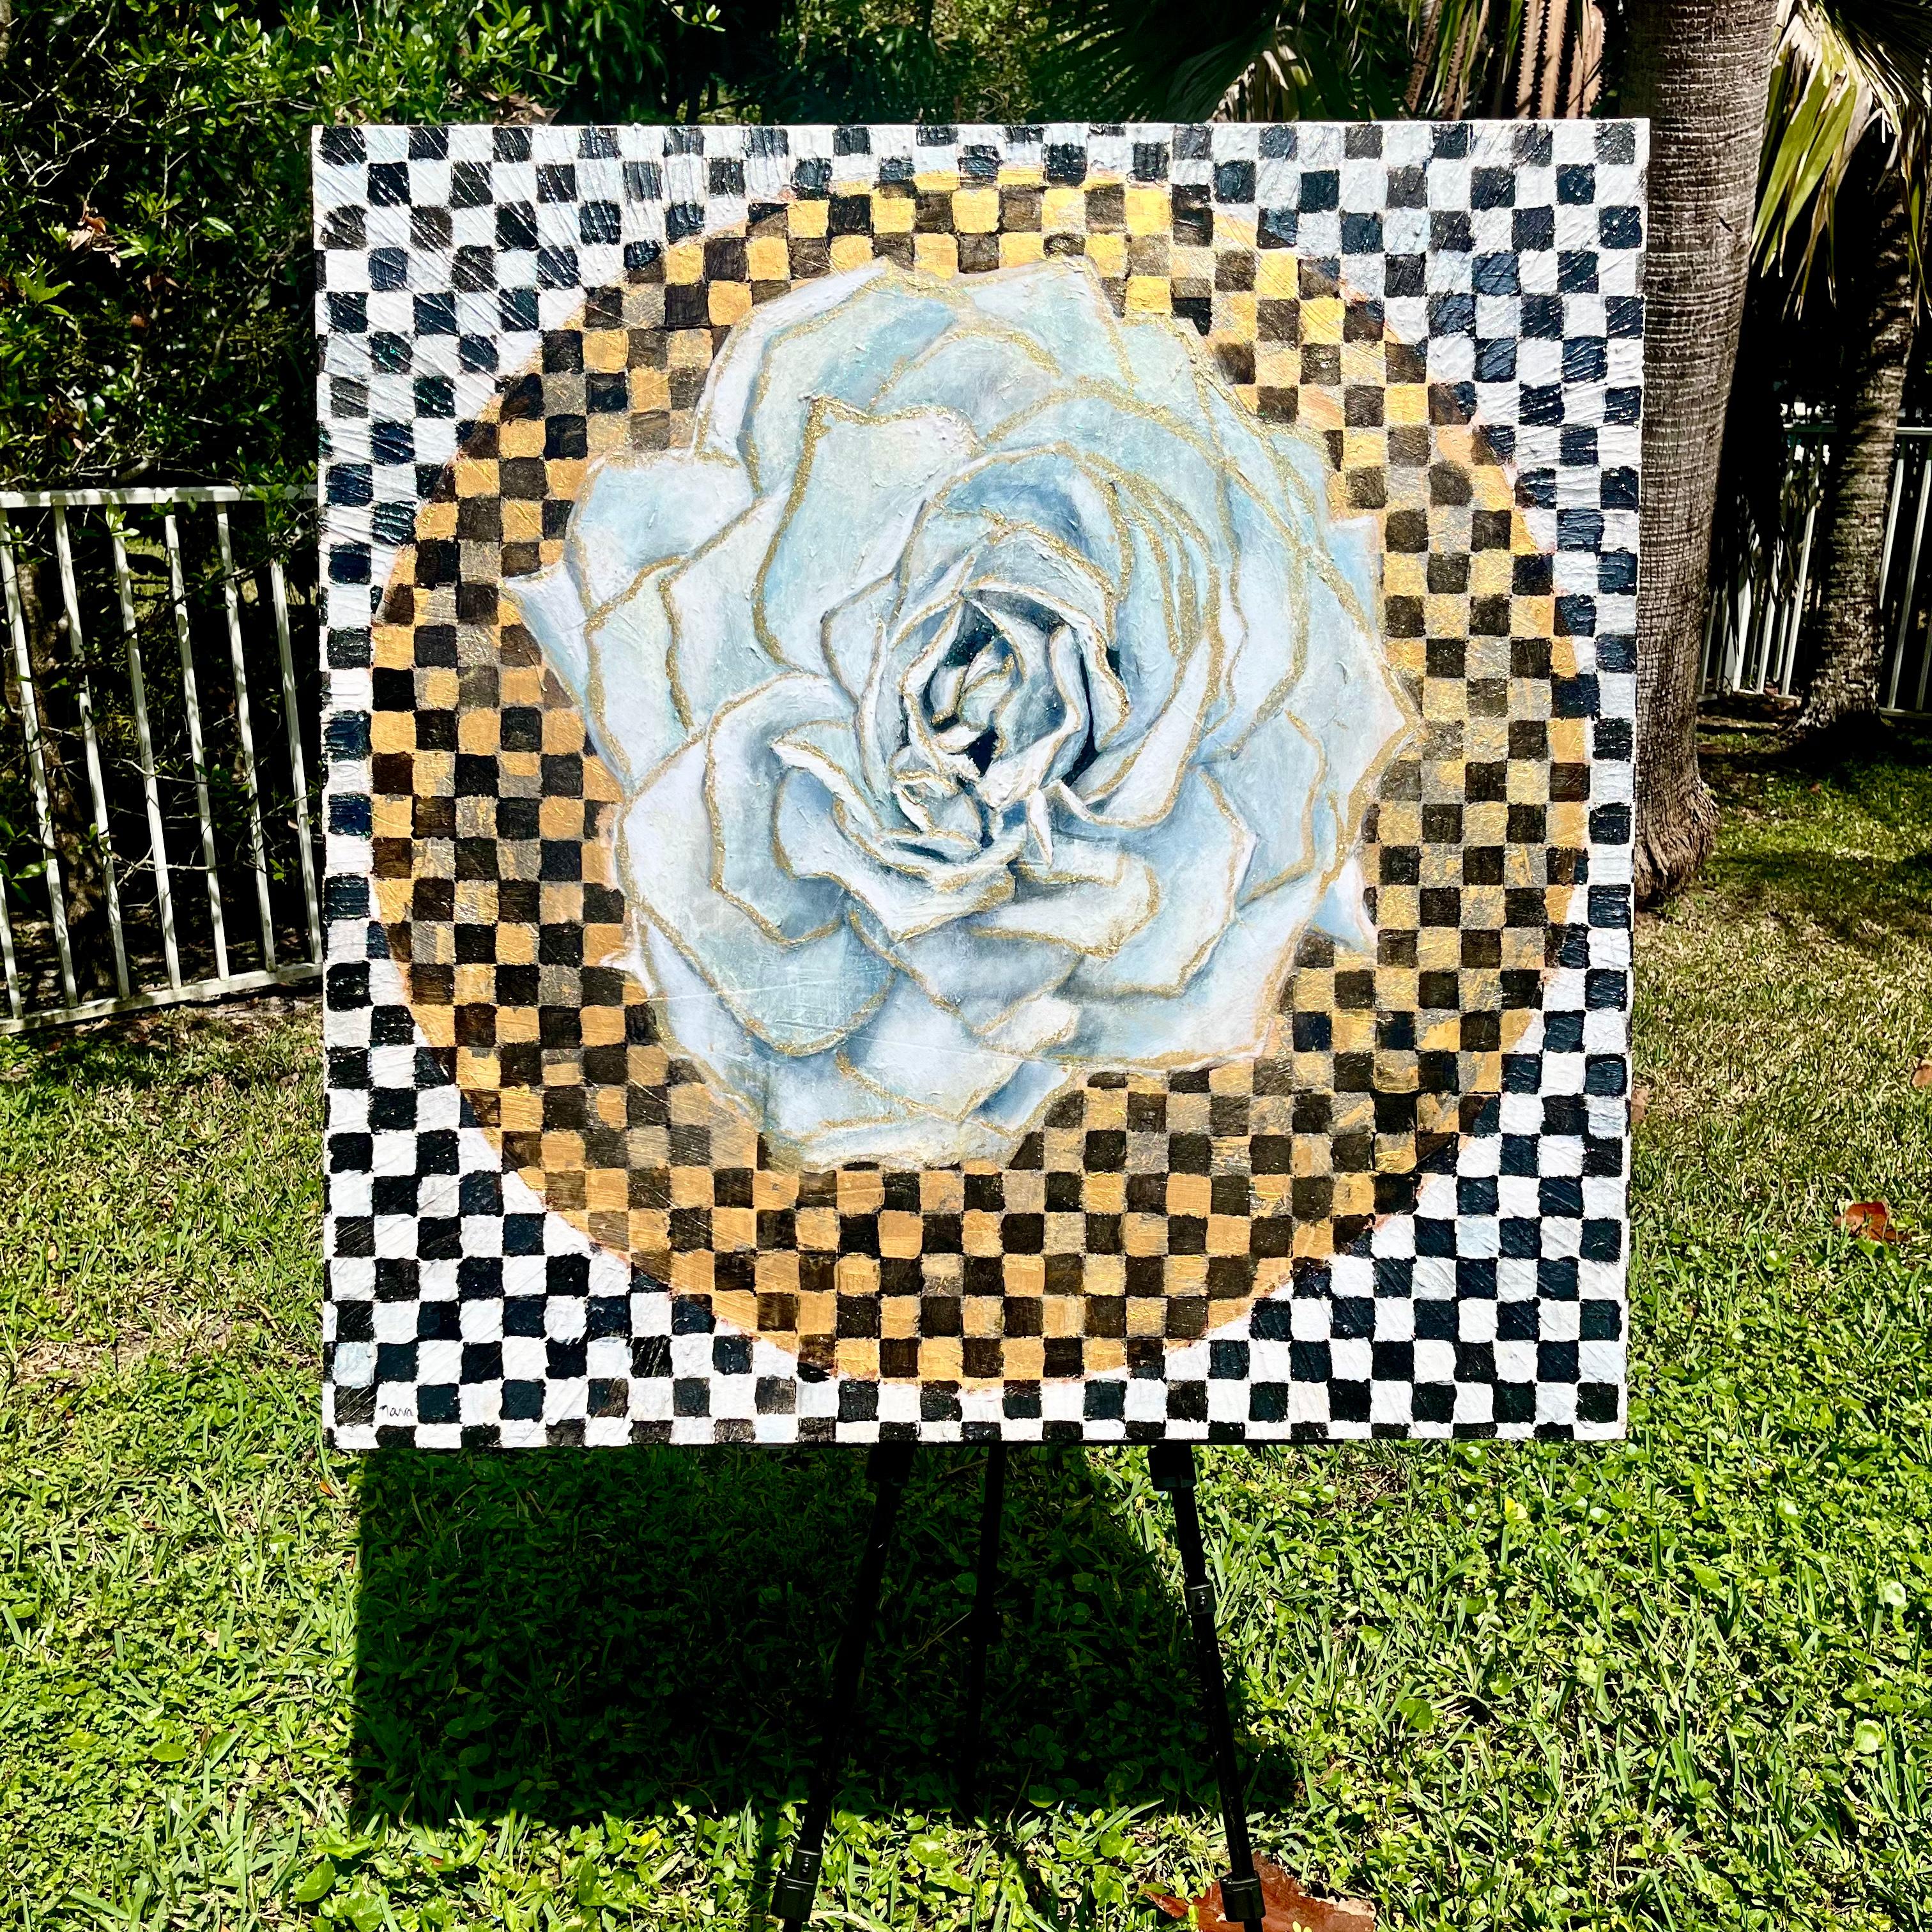 <p>Artist Comments<br>Artist Nava Lundy presents a floral portrait of a rose on a checkered background. 